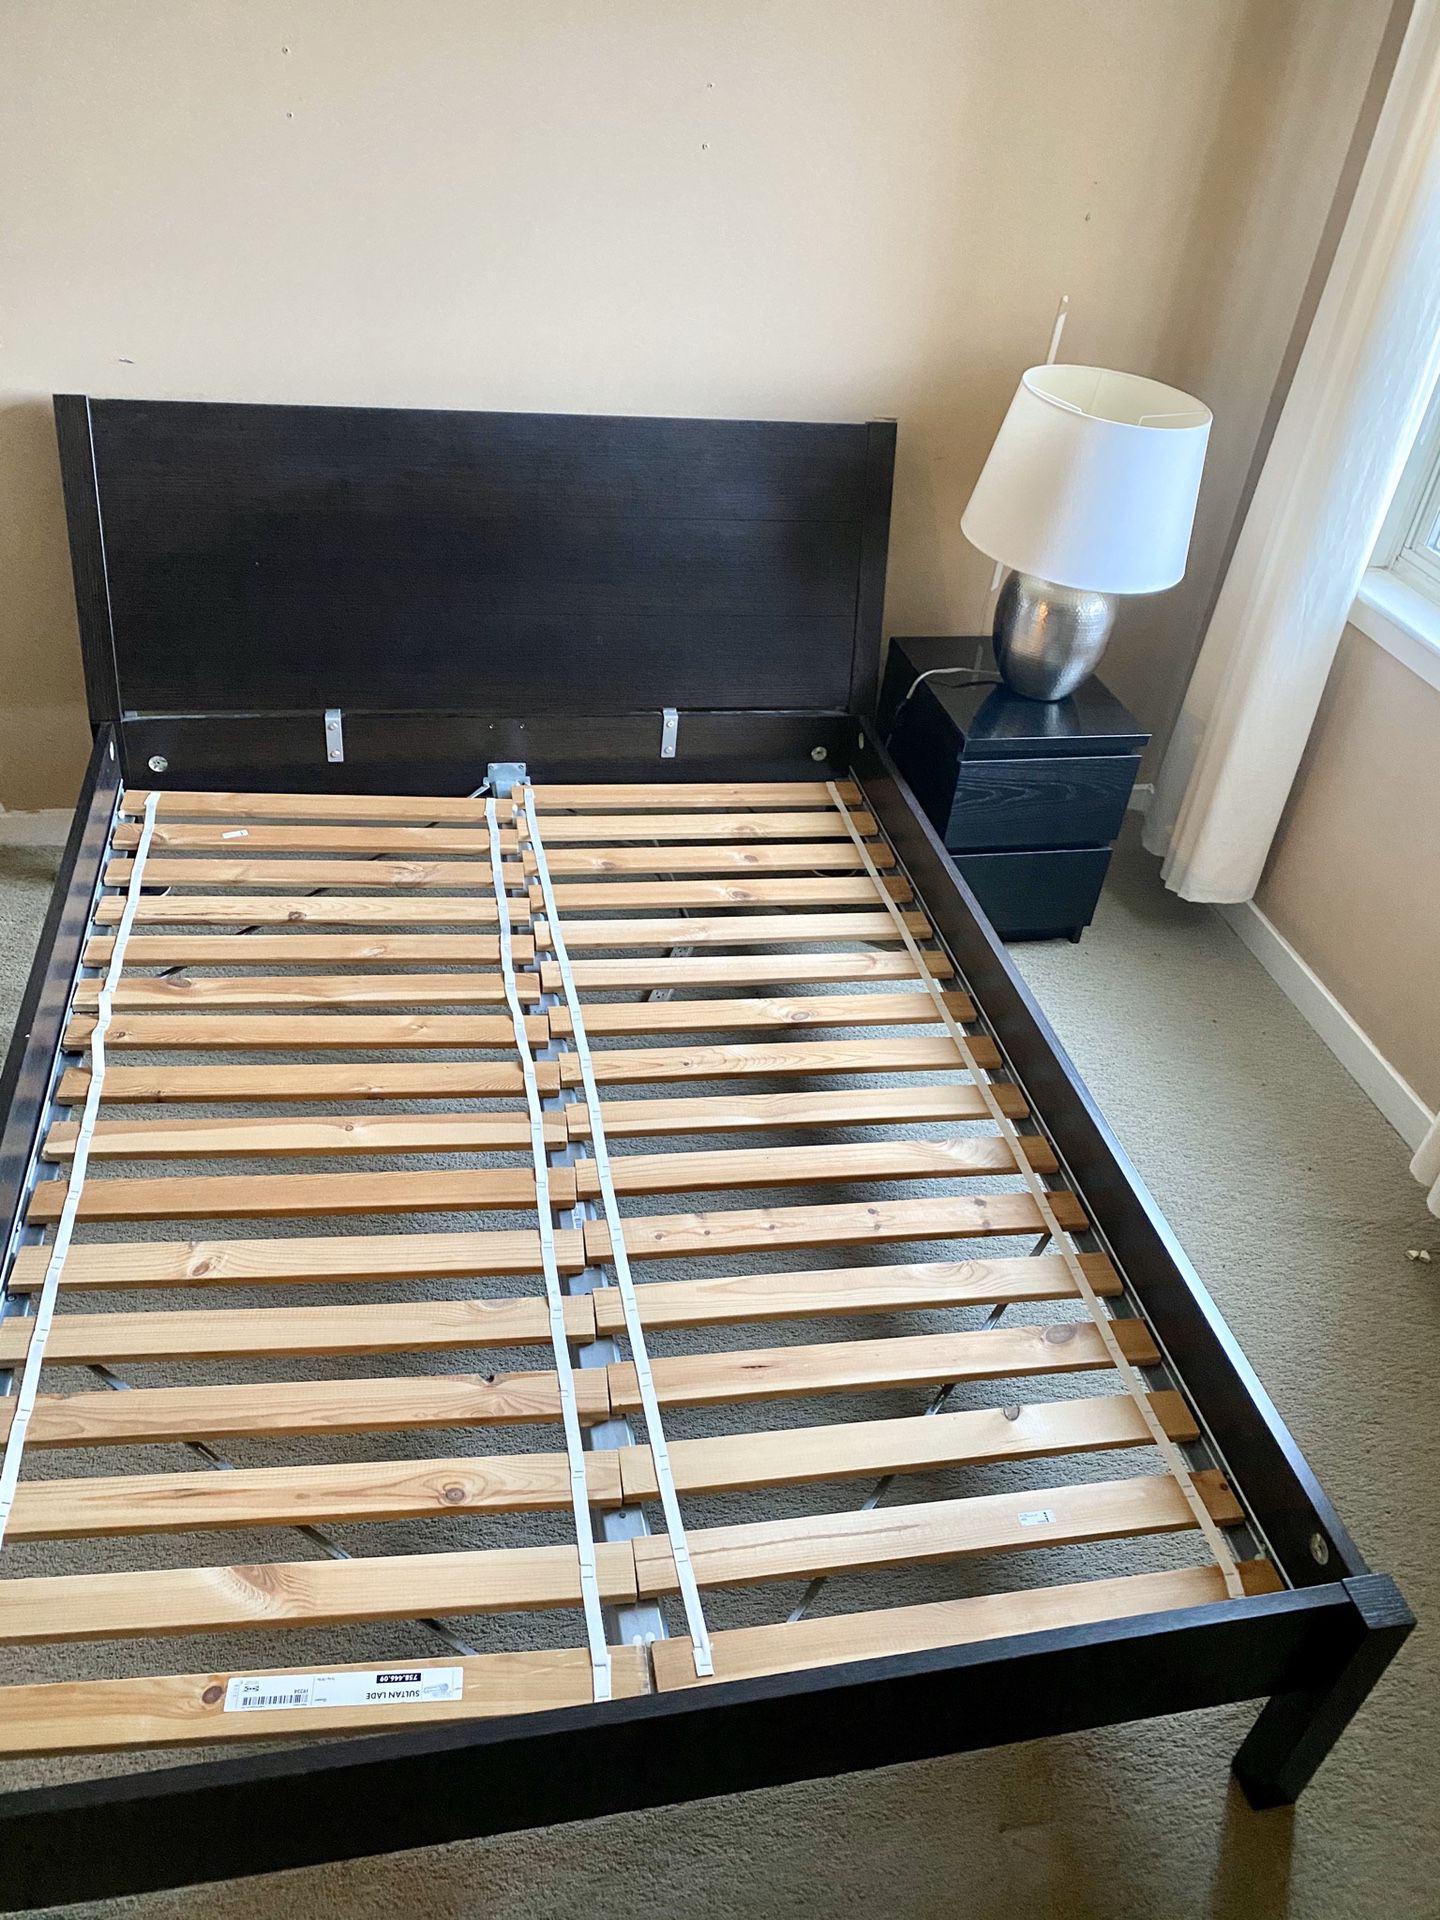 Queen size bed frame and nightstand